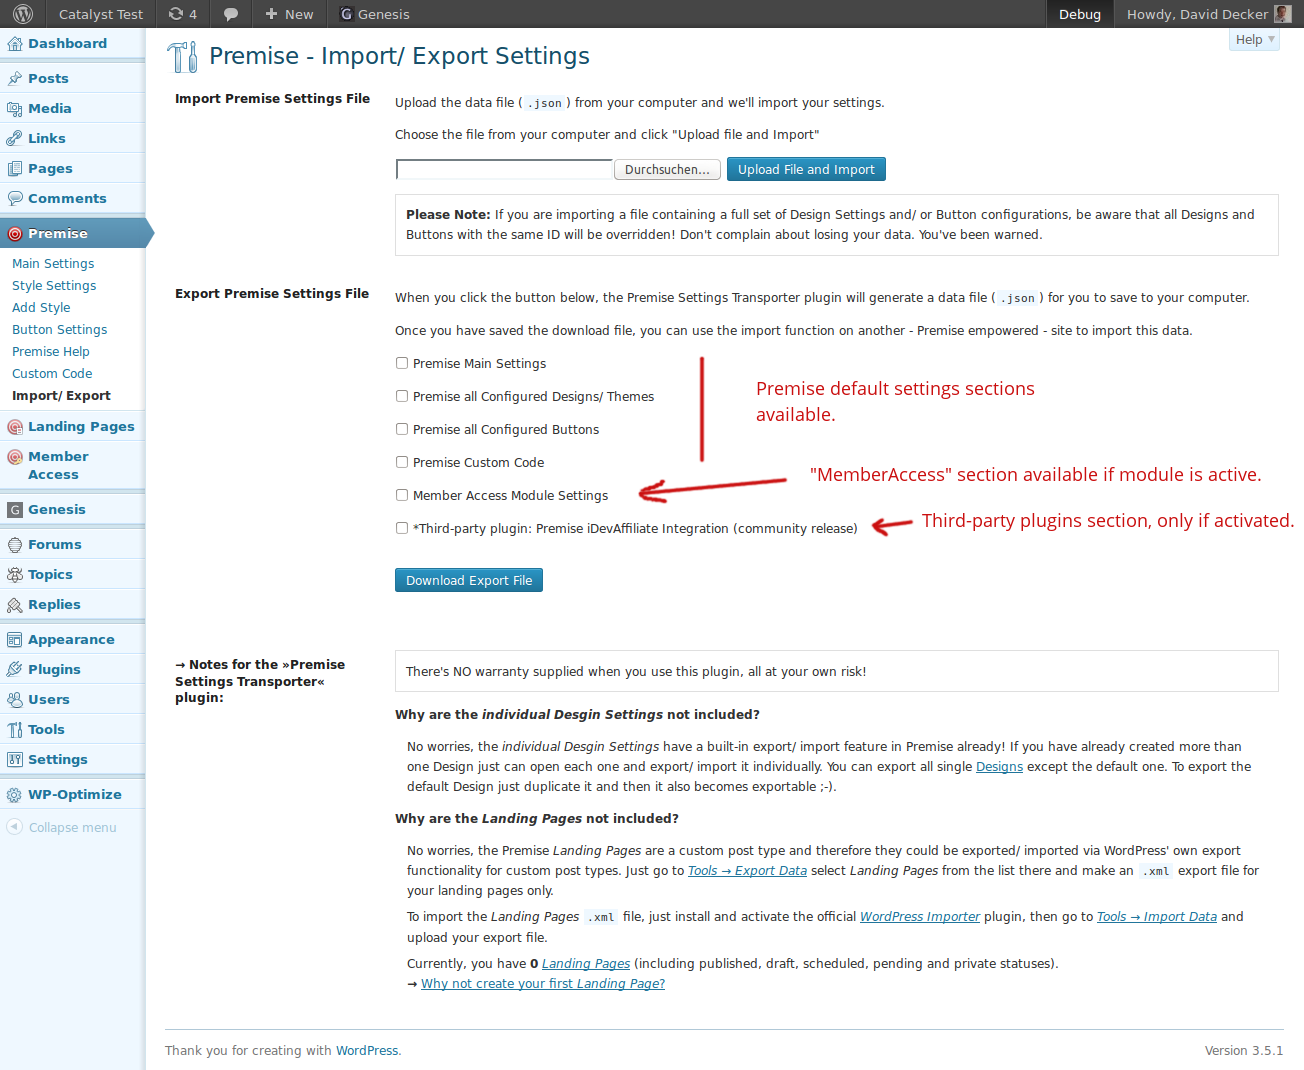 Premise Settings Transporter: new Import and Export admin page for "Premise" plugin. ([Click here for larger version of screenshot](https://www.dropbox.com/s/4n1omd466dvh2zp/screenshot-01.png))